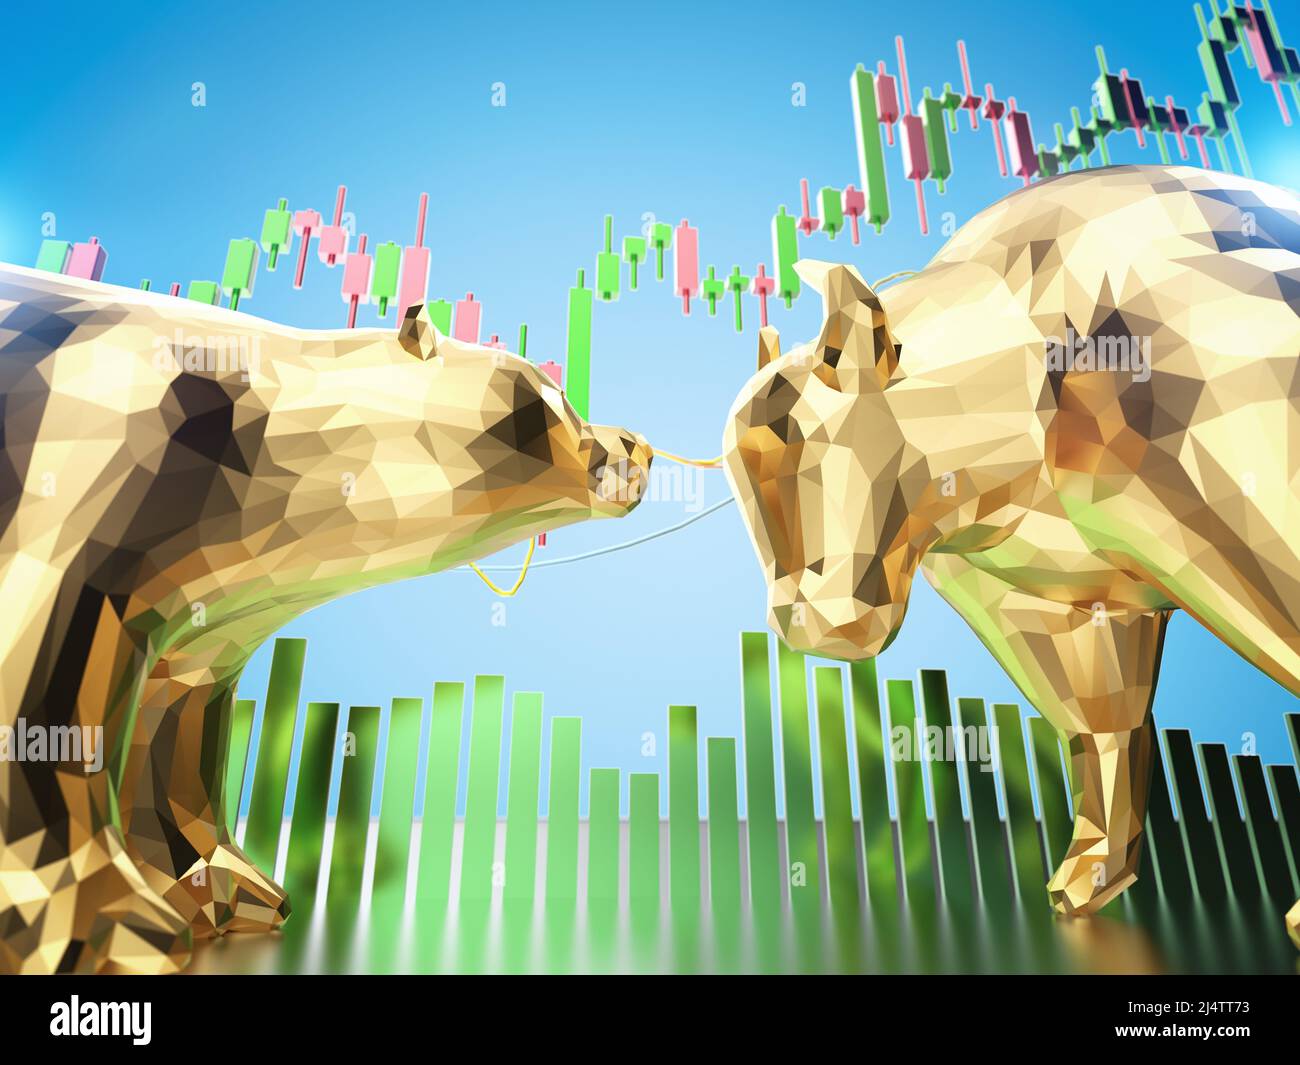 Bull and bear economy concept with 3d rendering bull and bear confront Stock Photo